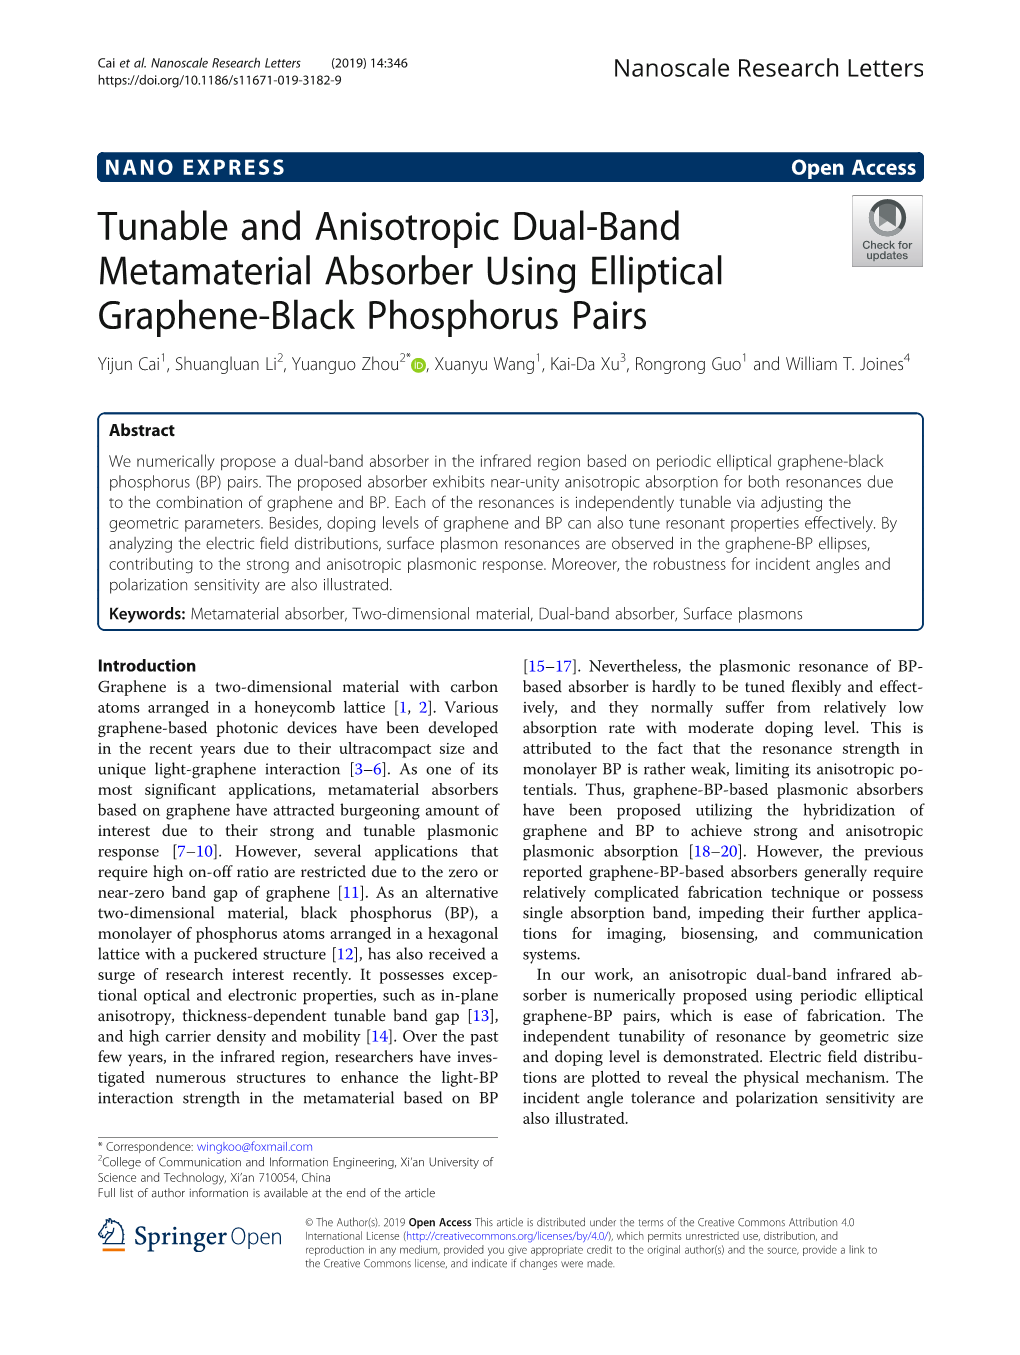 Tunable and Anisotropic Dual-Band Metamaterial Absorber Using